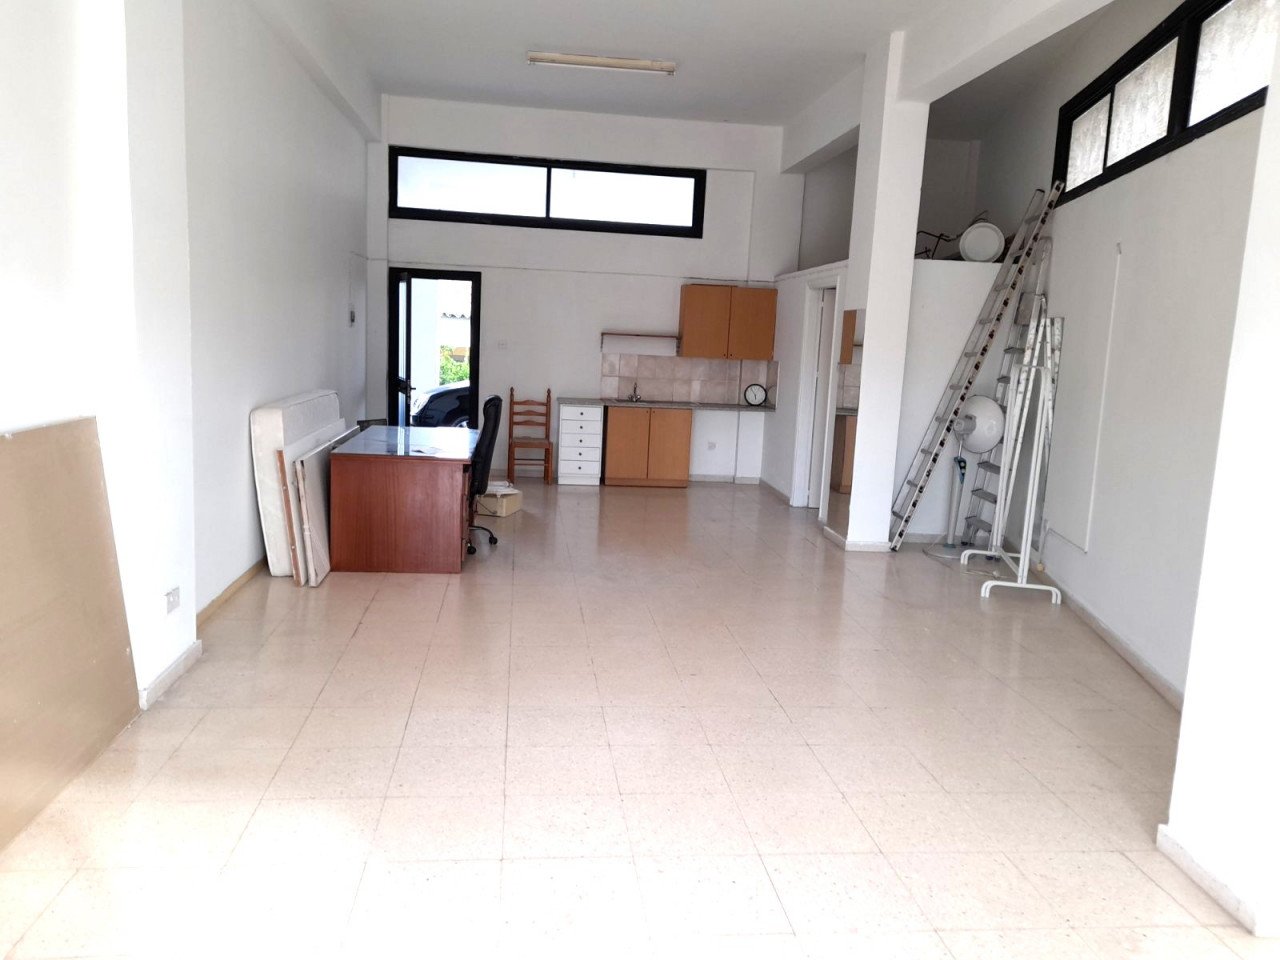 Property for Rent: Commercial (Shop) in Latsia, Nicosia for Rent | Key Realtor Cyprus